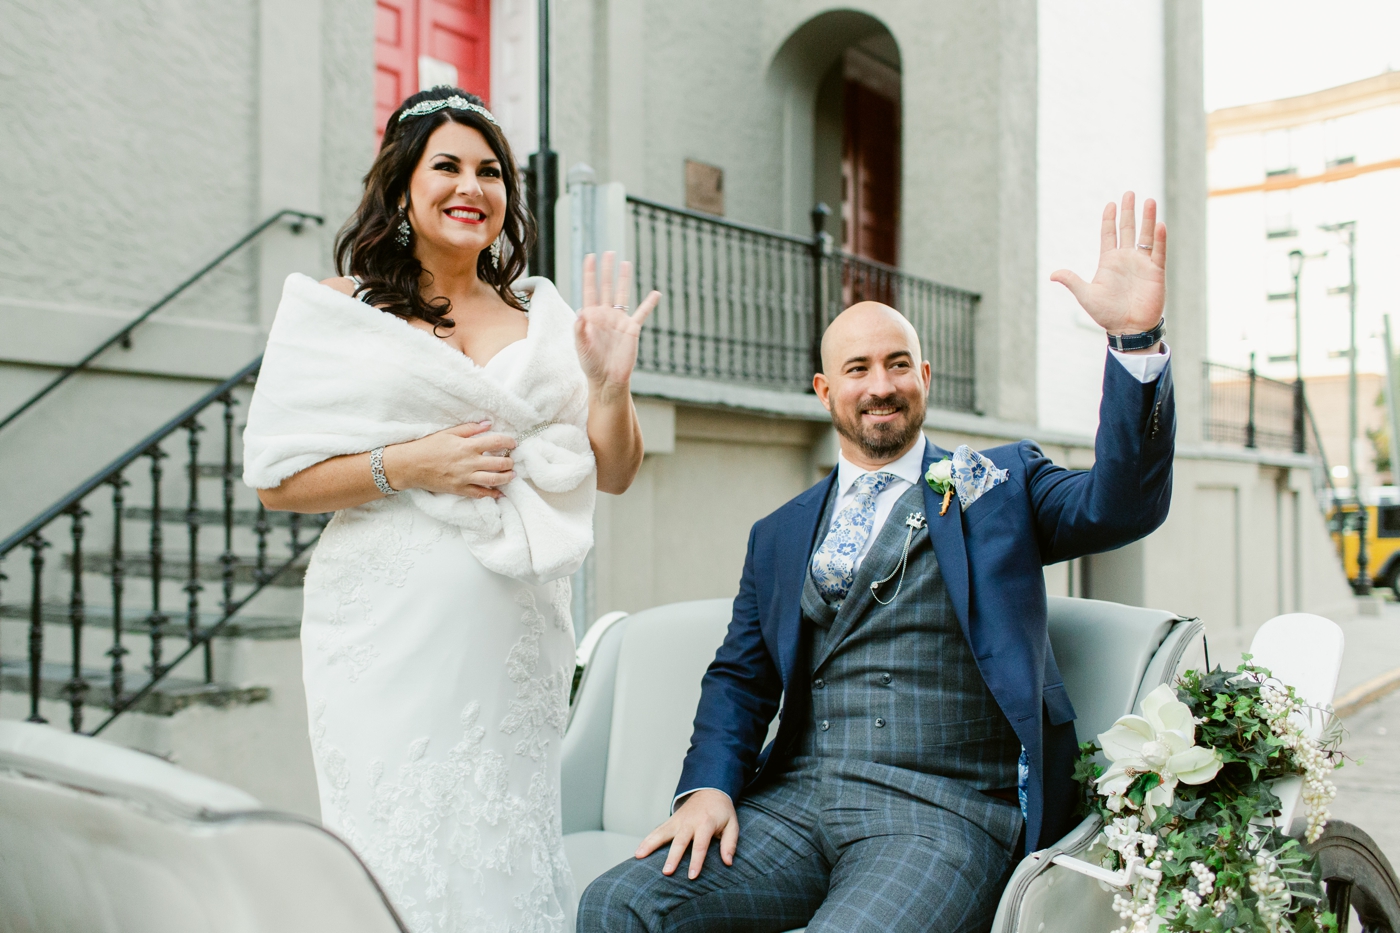 Wedding elopement reception at The Olde Pink House in Savannah